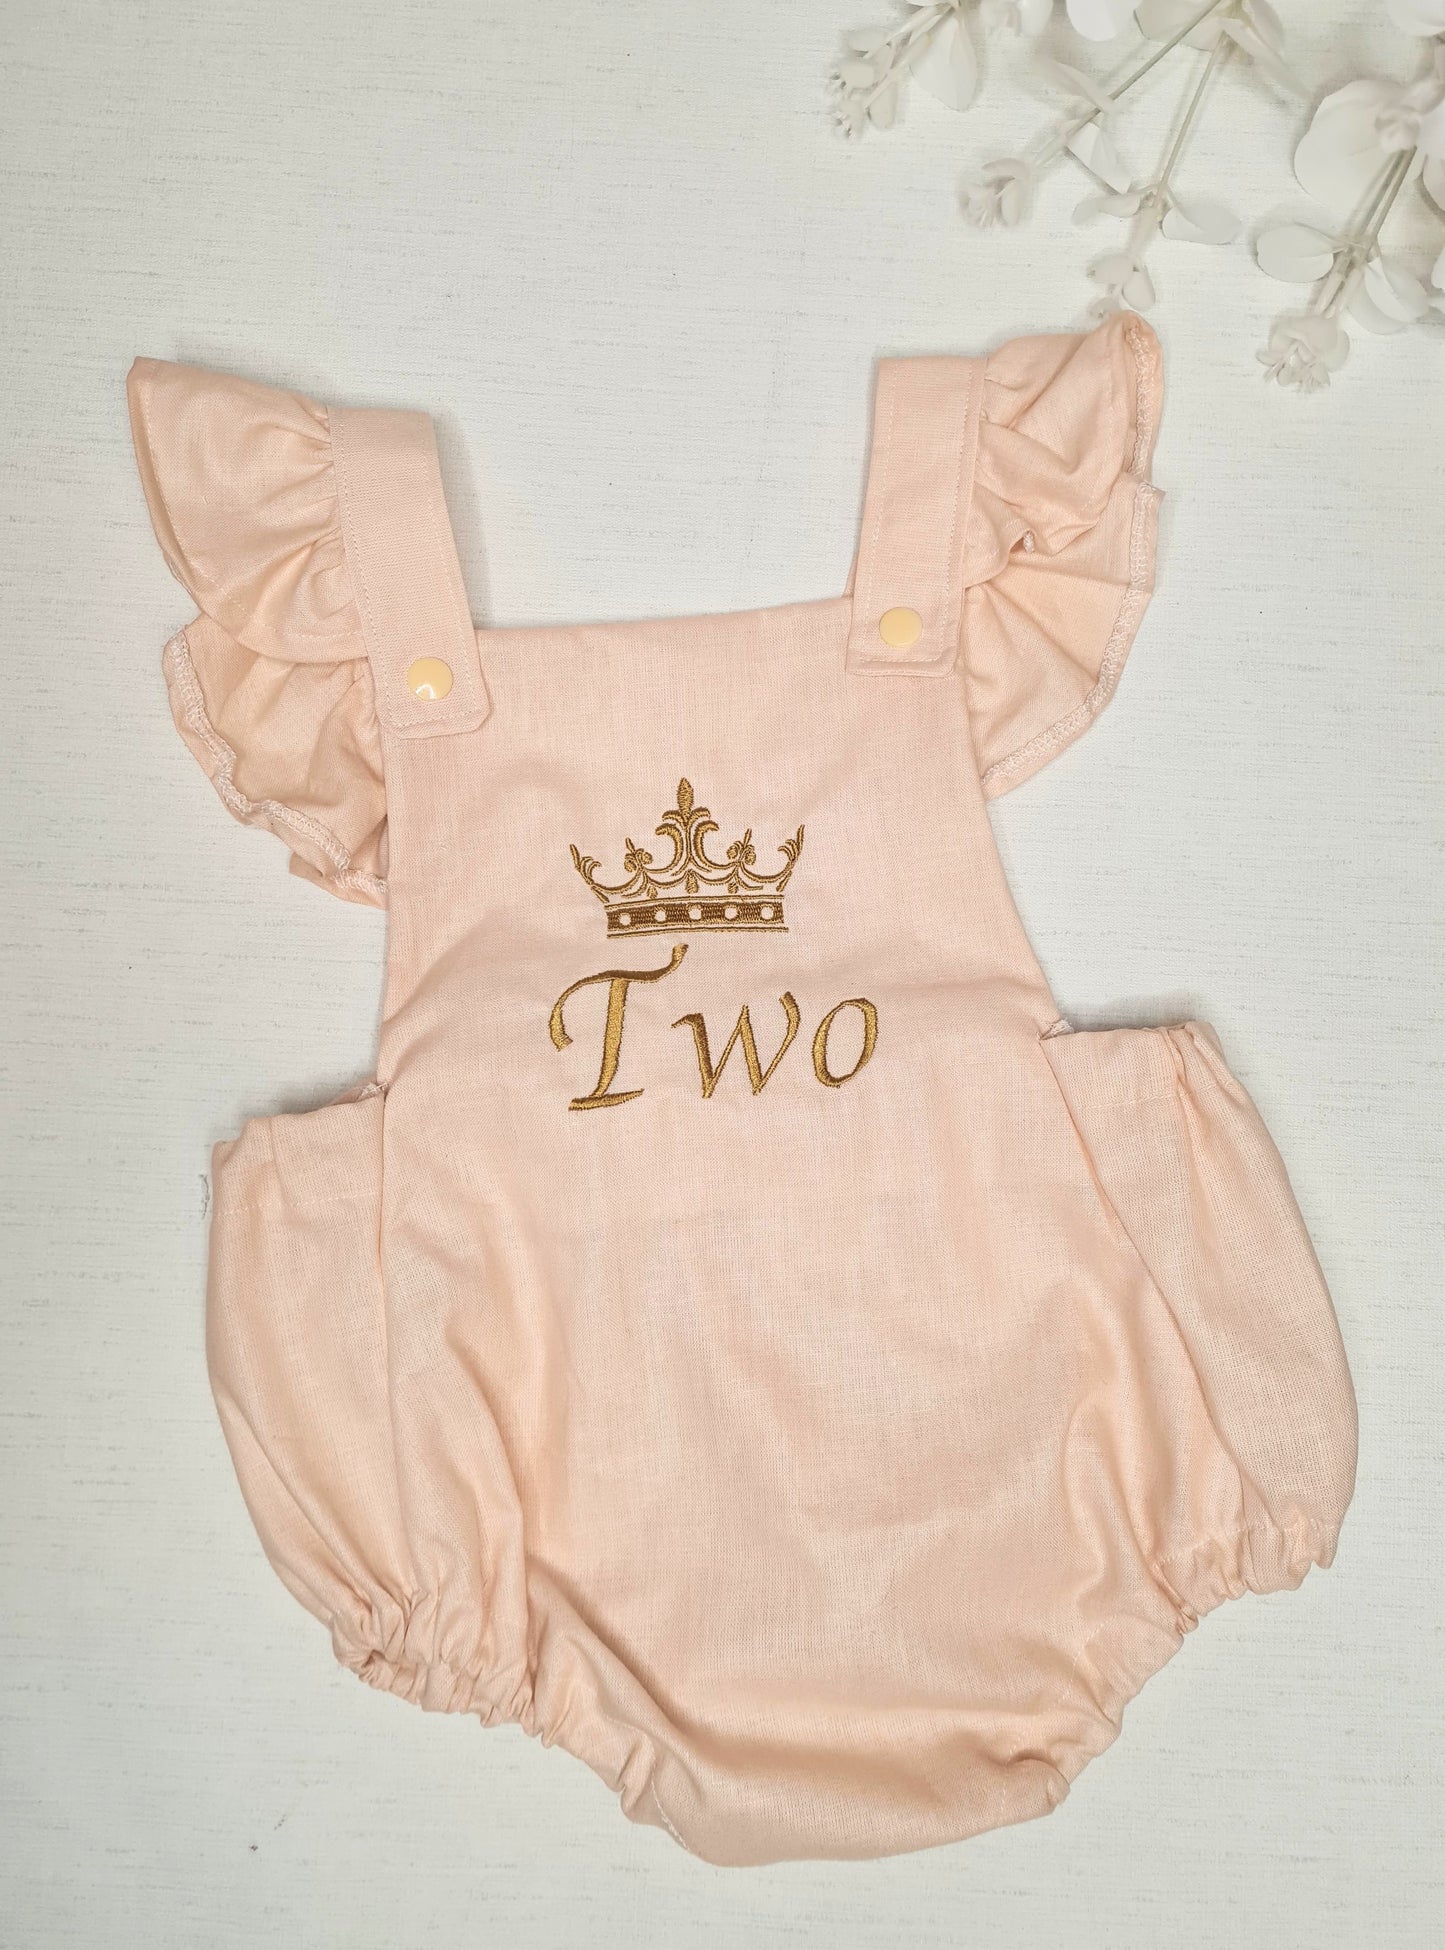 Rose linen number crown birthday frilly romper